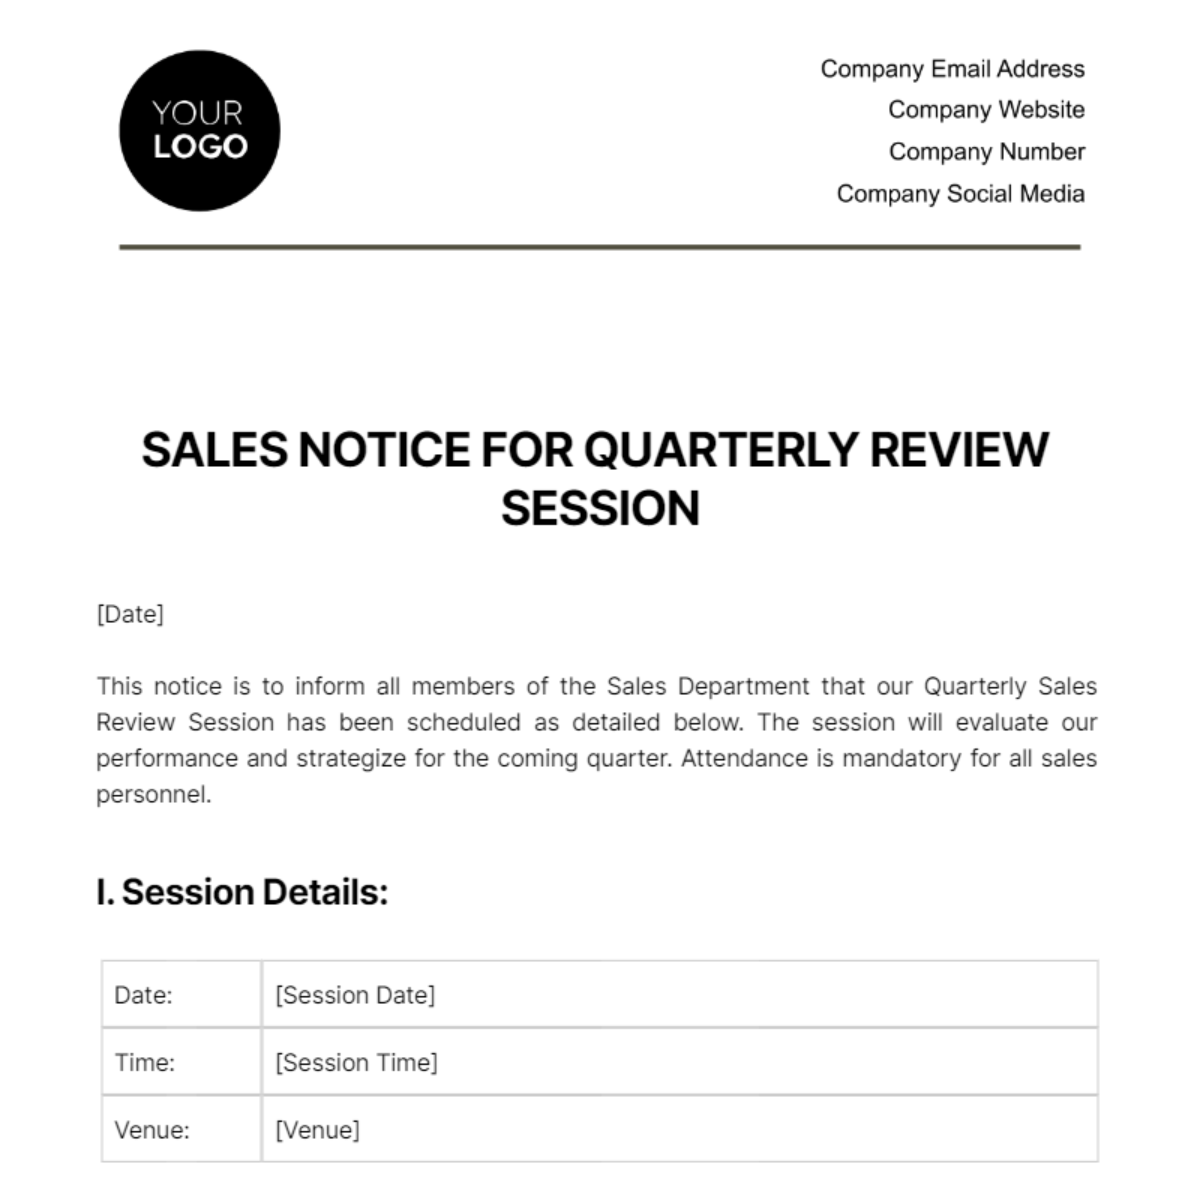 Free Sales Notice for Quarterly Review Session Template